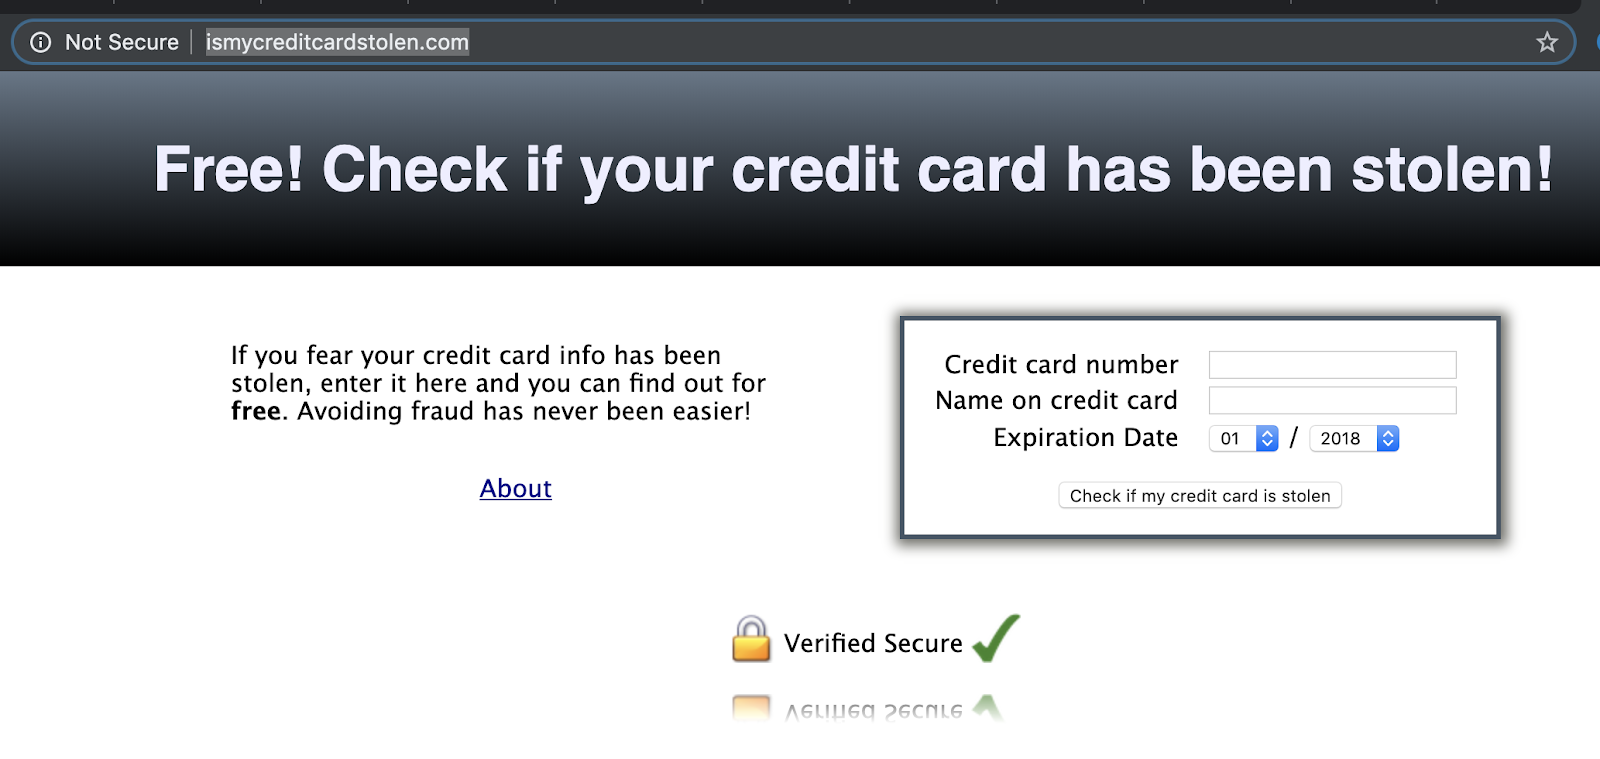 Image of a "free credit check" phishing scam